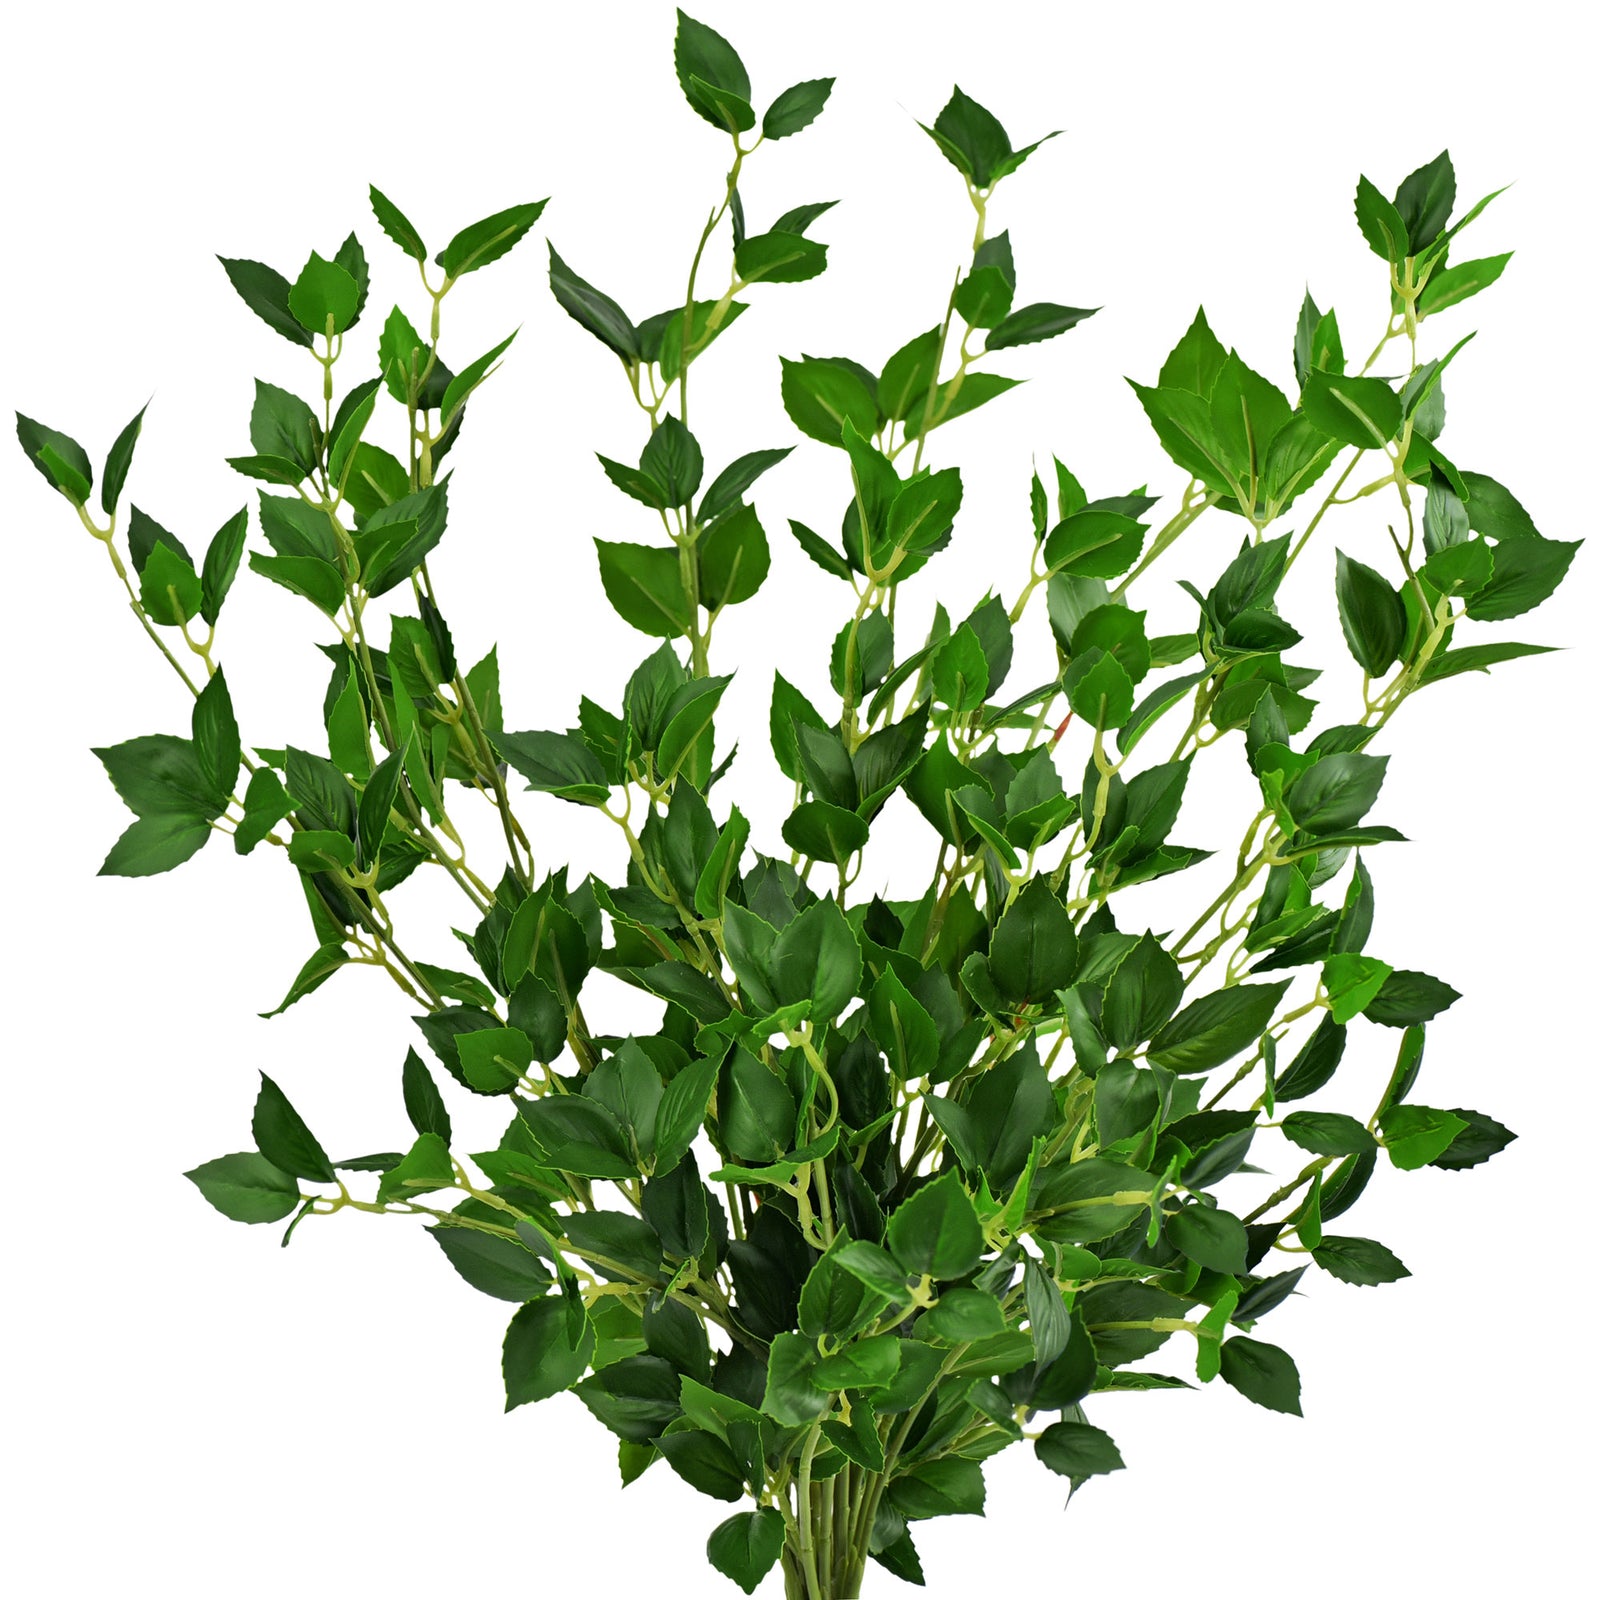 8 Stems 25.6'' 65cm Artificial Cherry Leaves and Branches Greenery Fillers for Floral Arrangement Decoration Wedding Home Décor